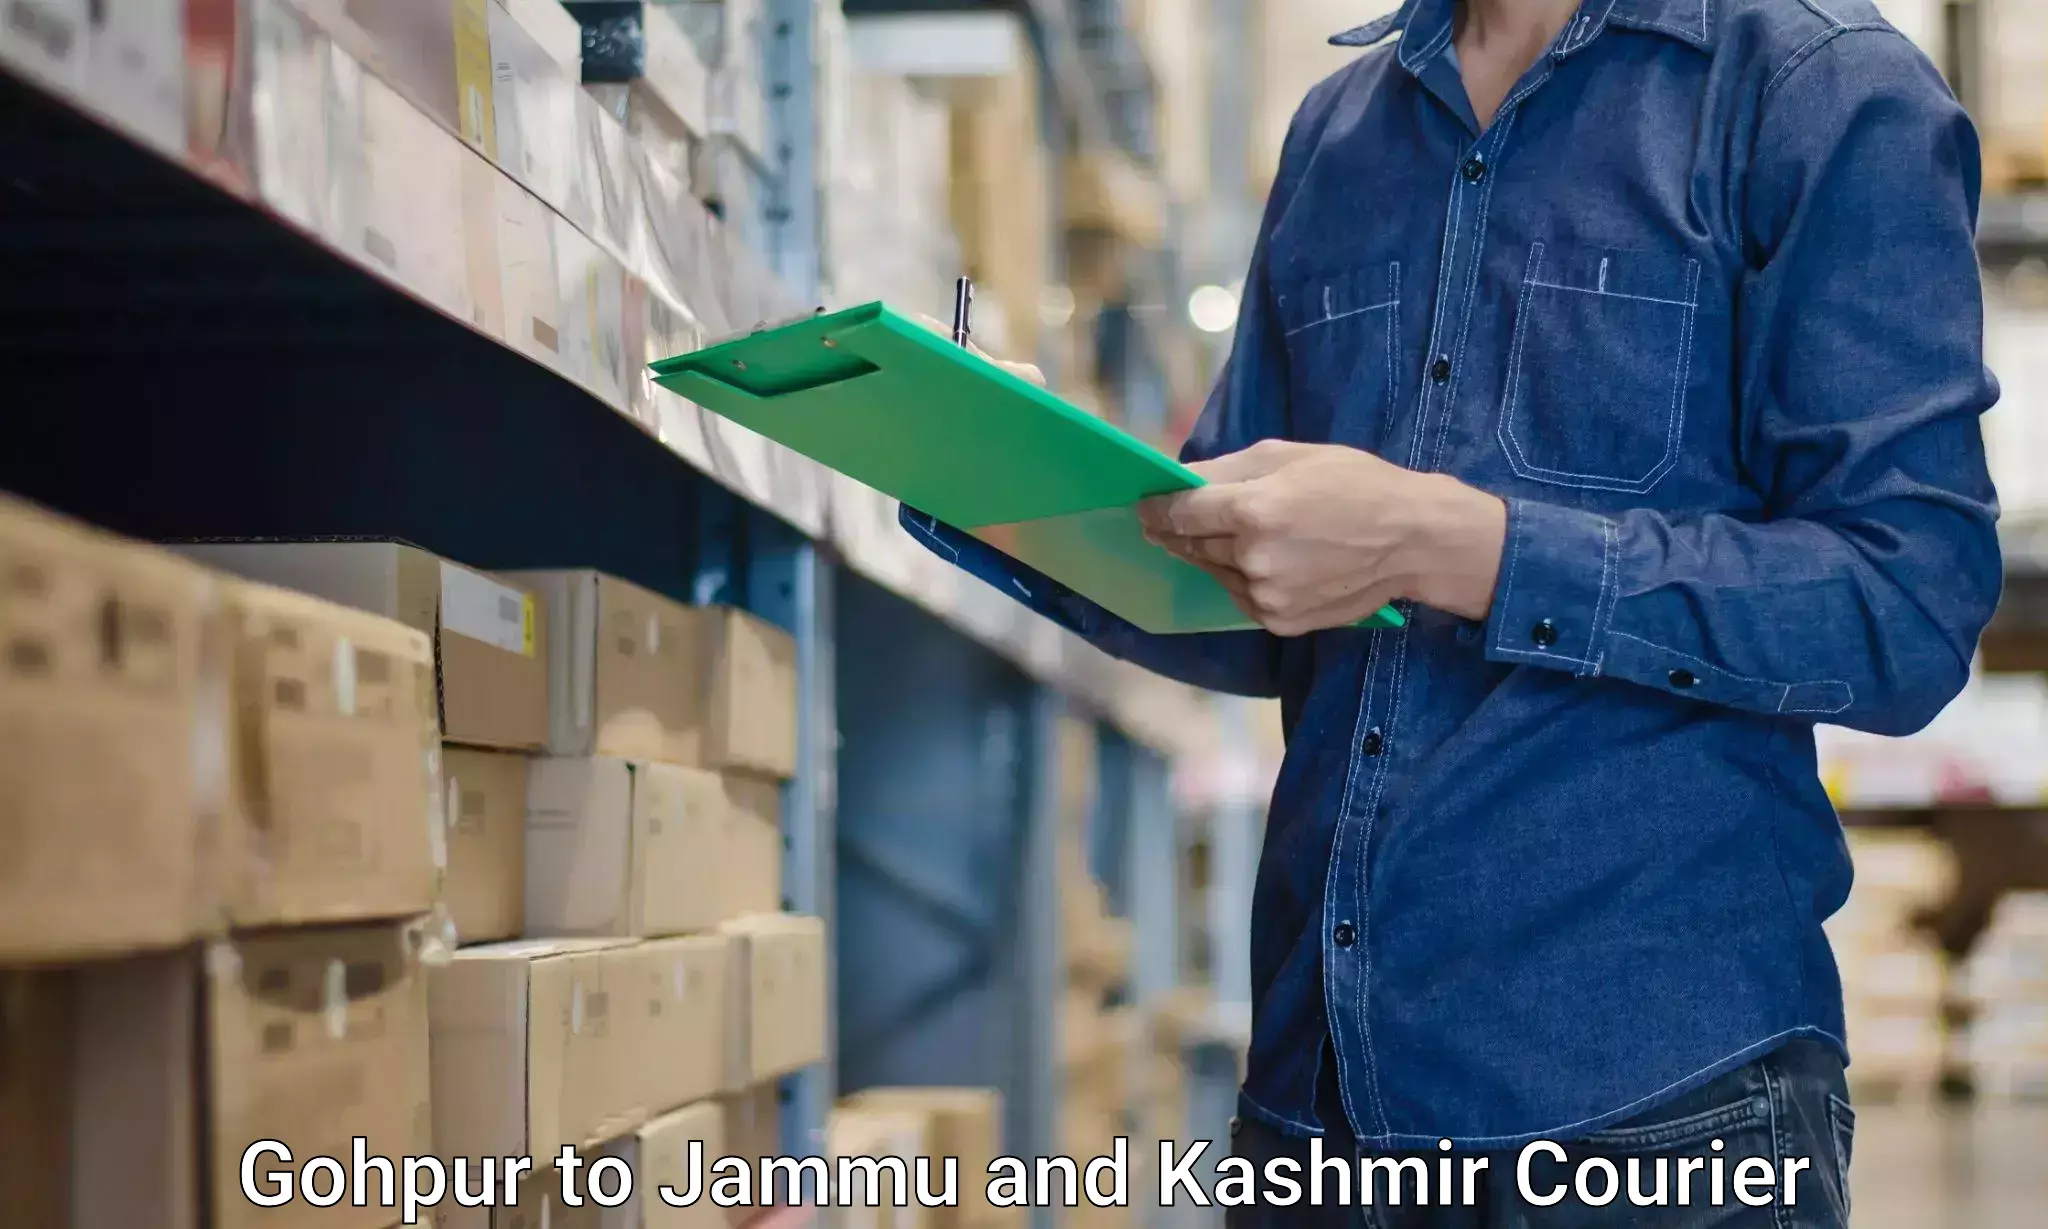 Moving and storage services in Gohpur to Anantnag